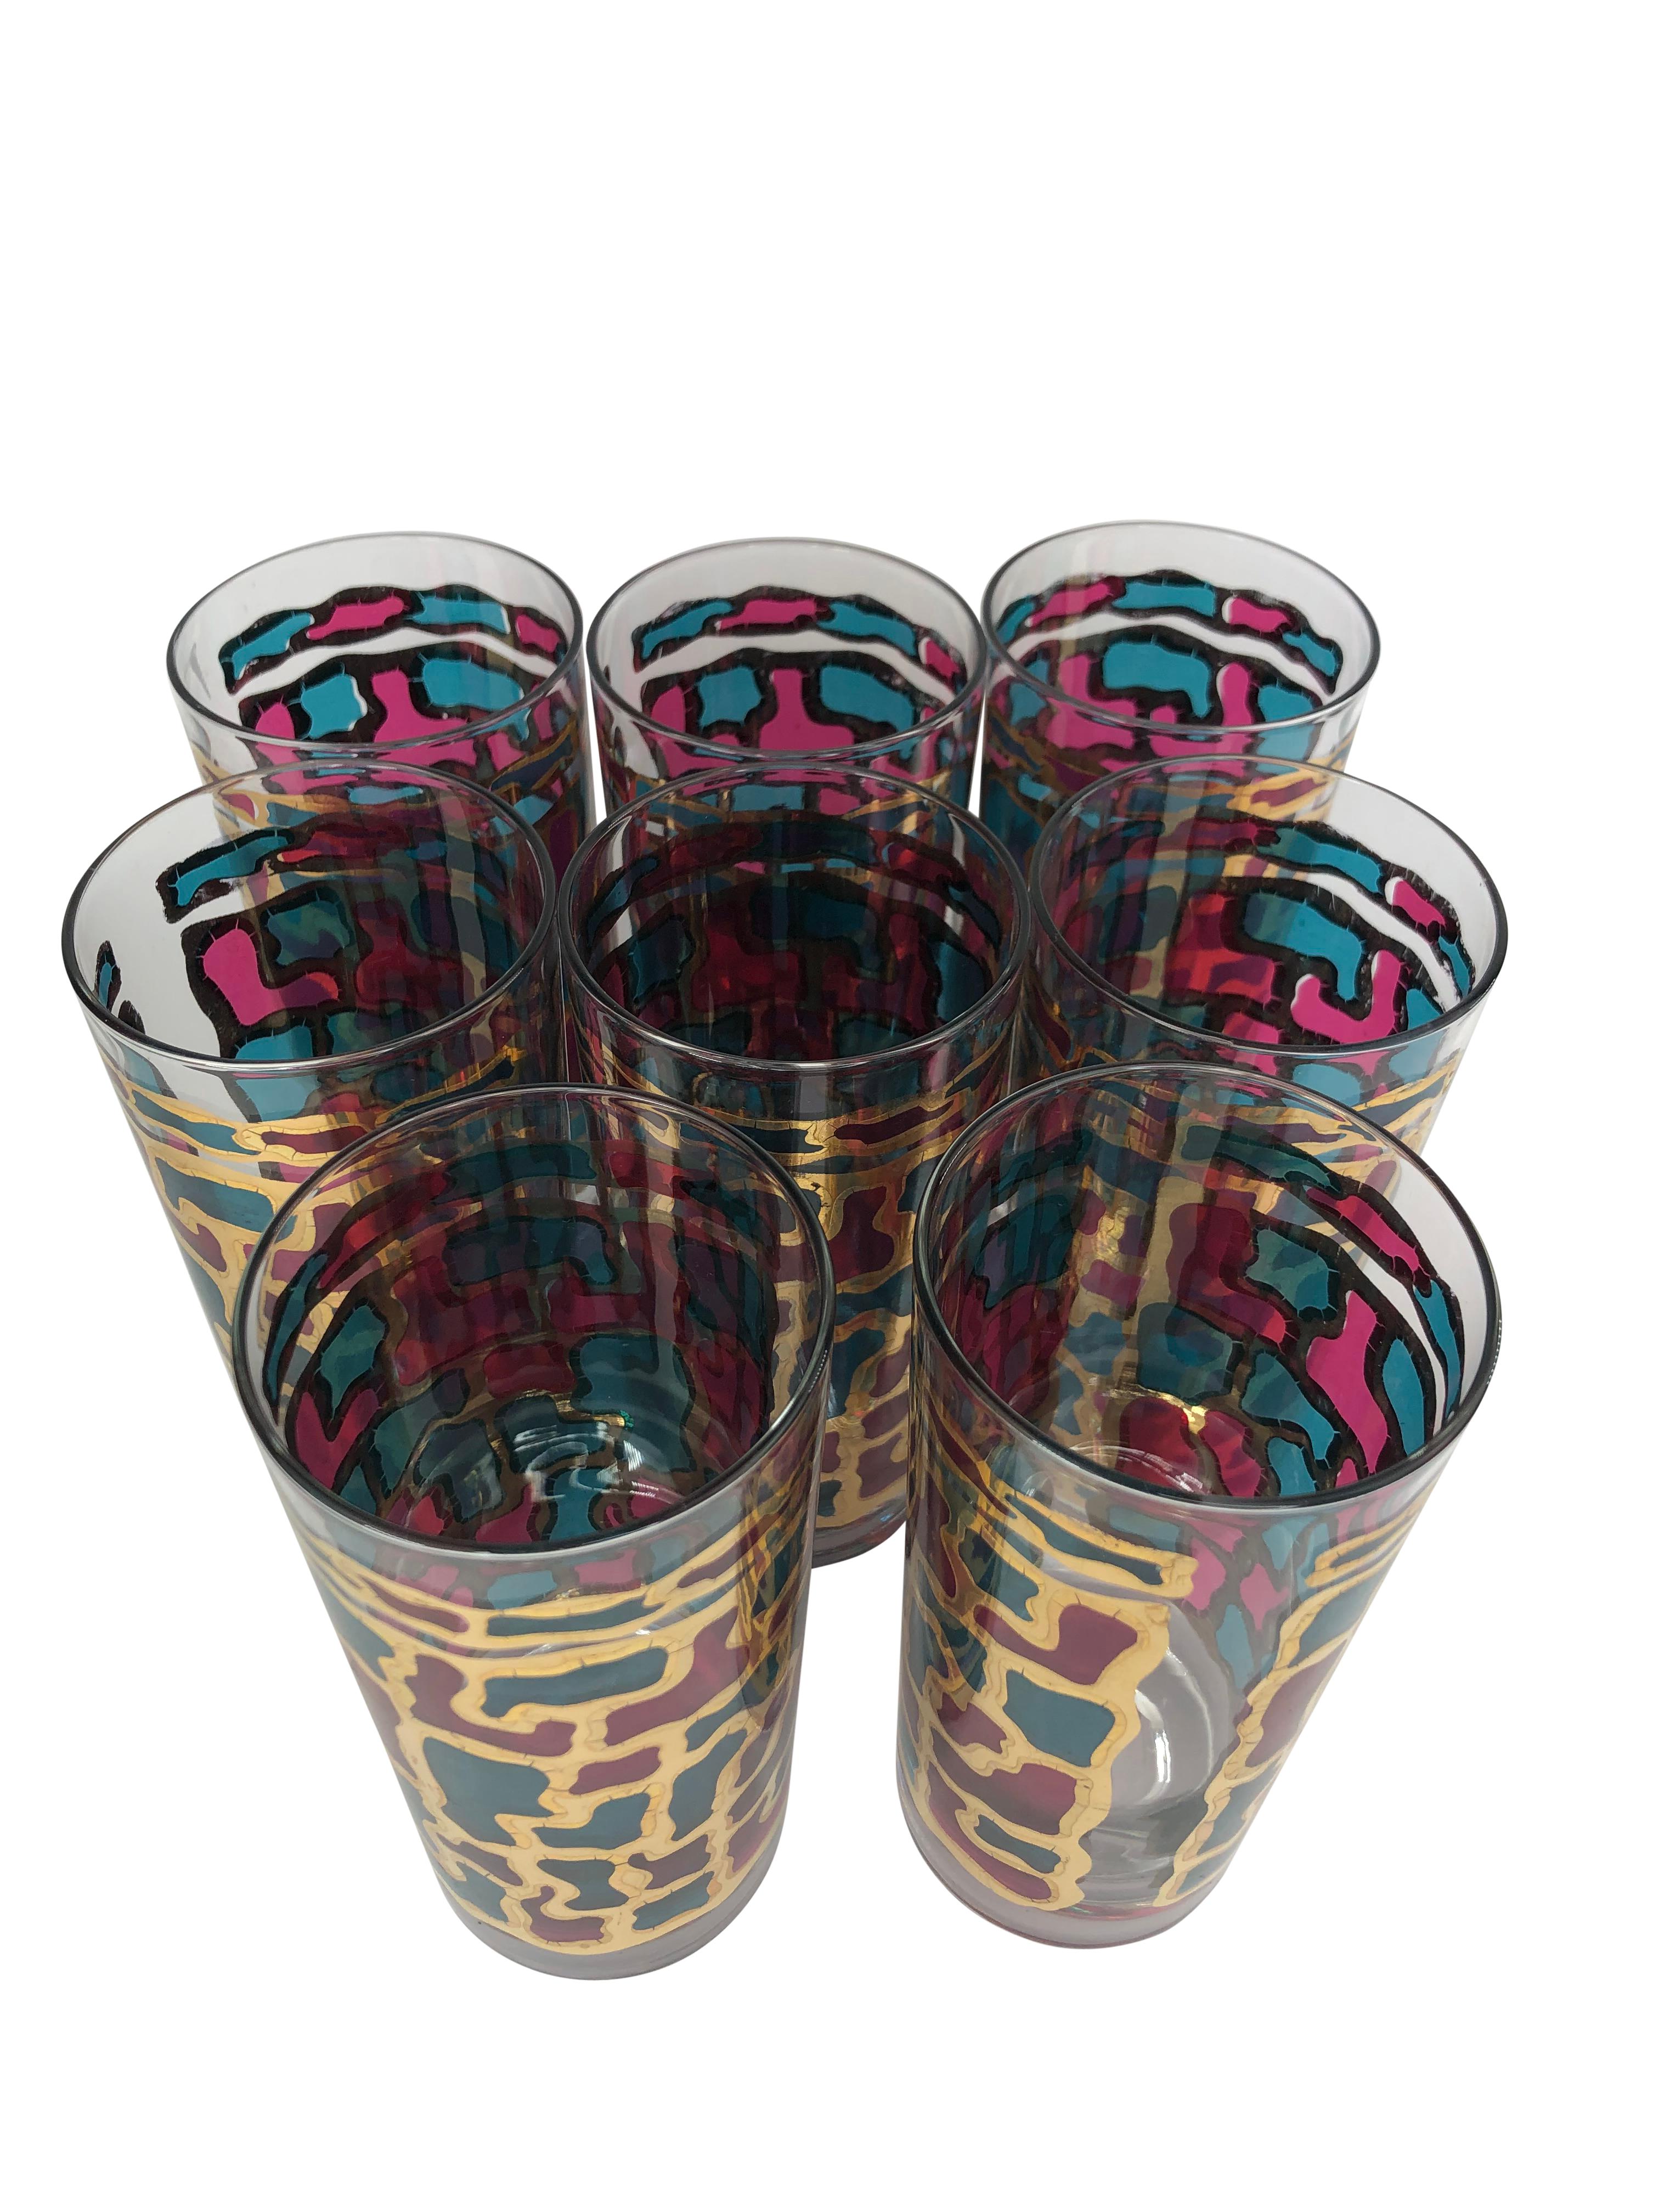 Set of 8 Vintage Blue and Fuchsia Stained Glass and Gilt Highball Glasses. Colorful panels framed on 22k gilt decoration. Glasses measure 5 1/2